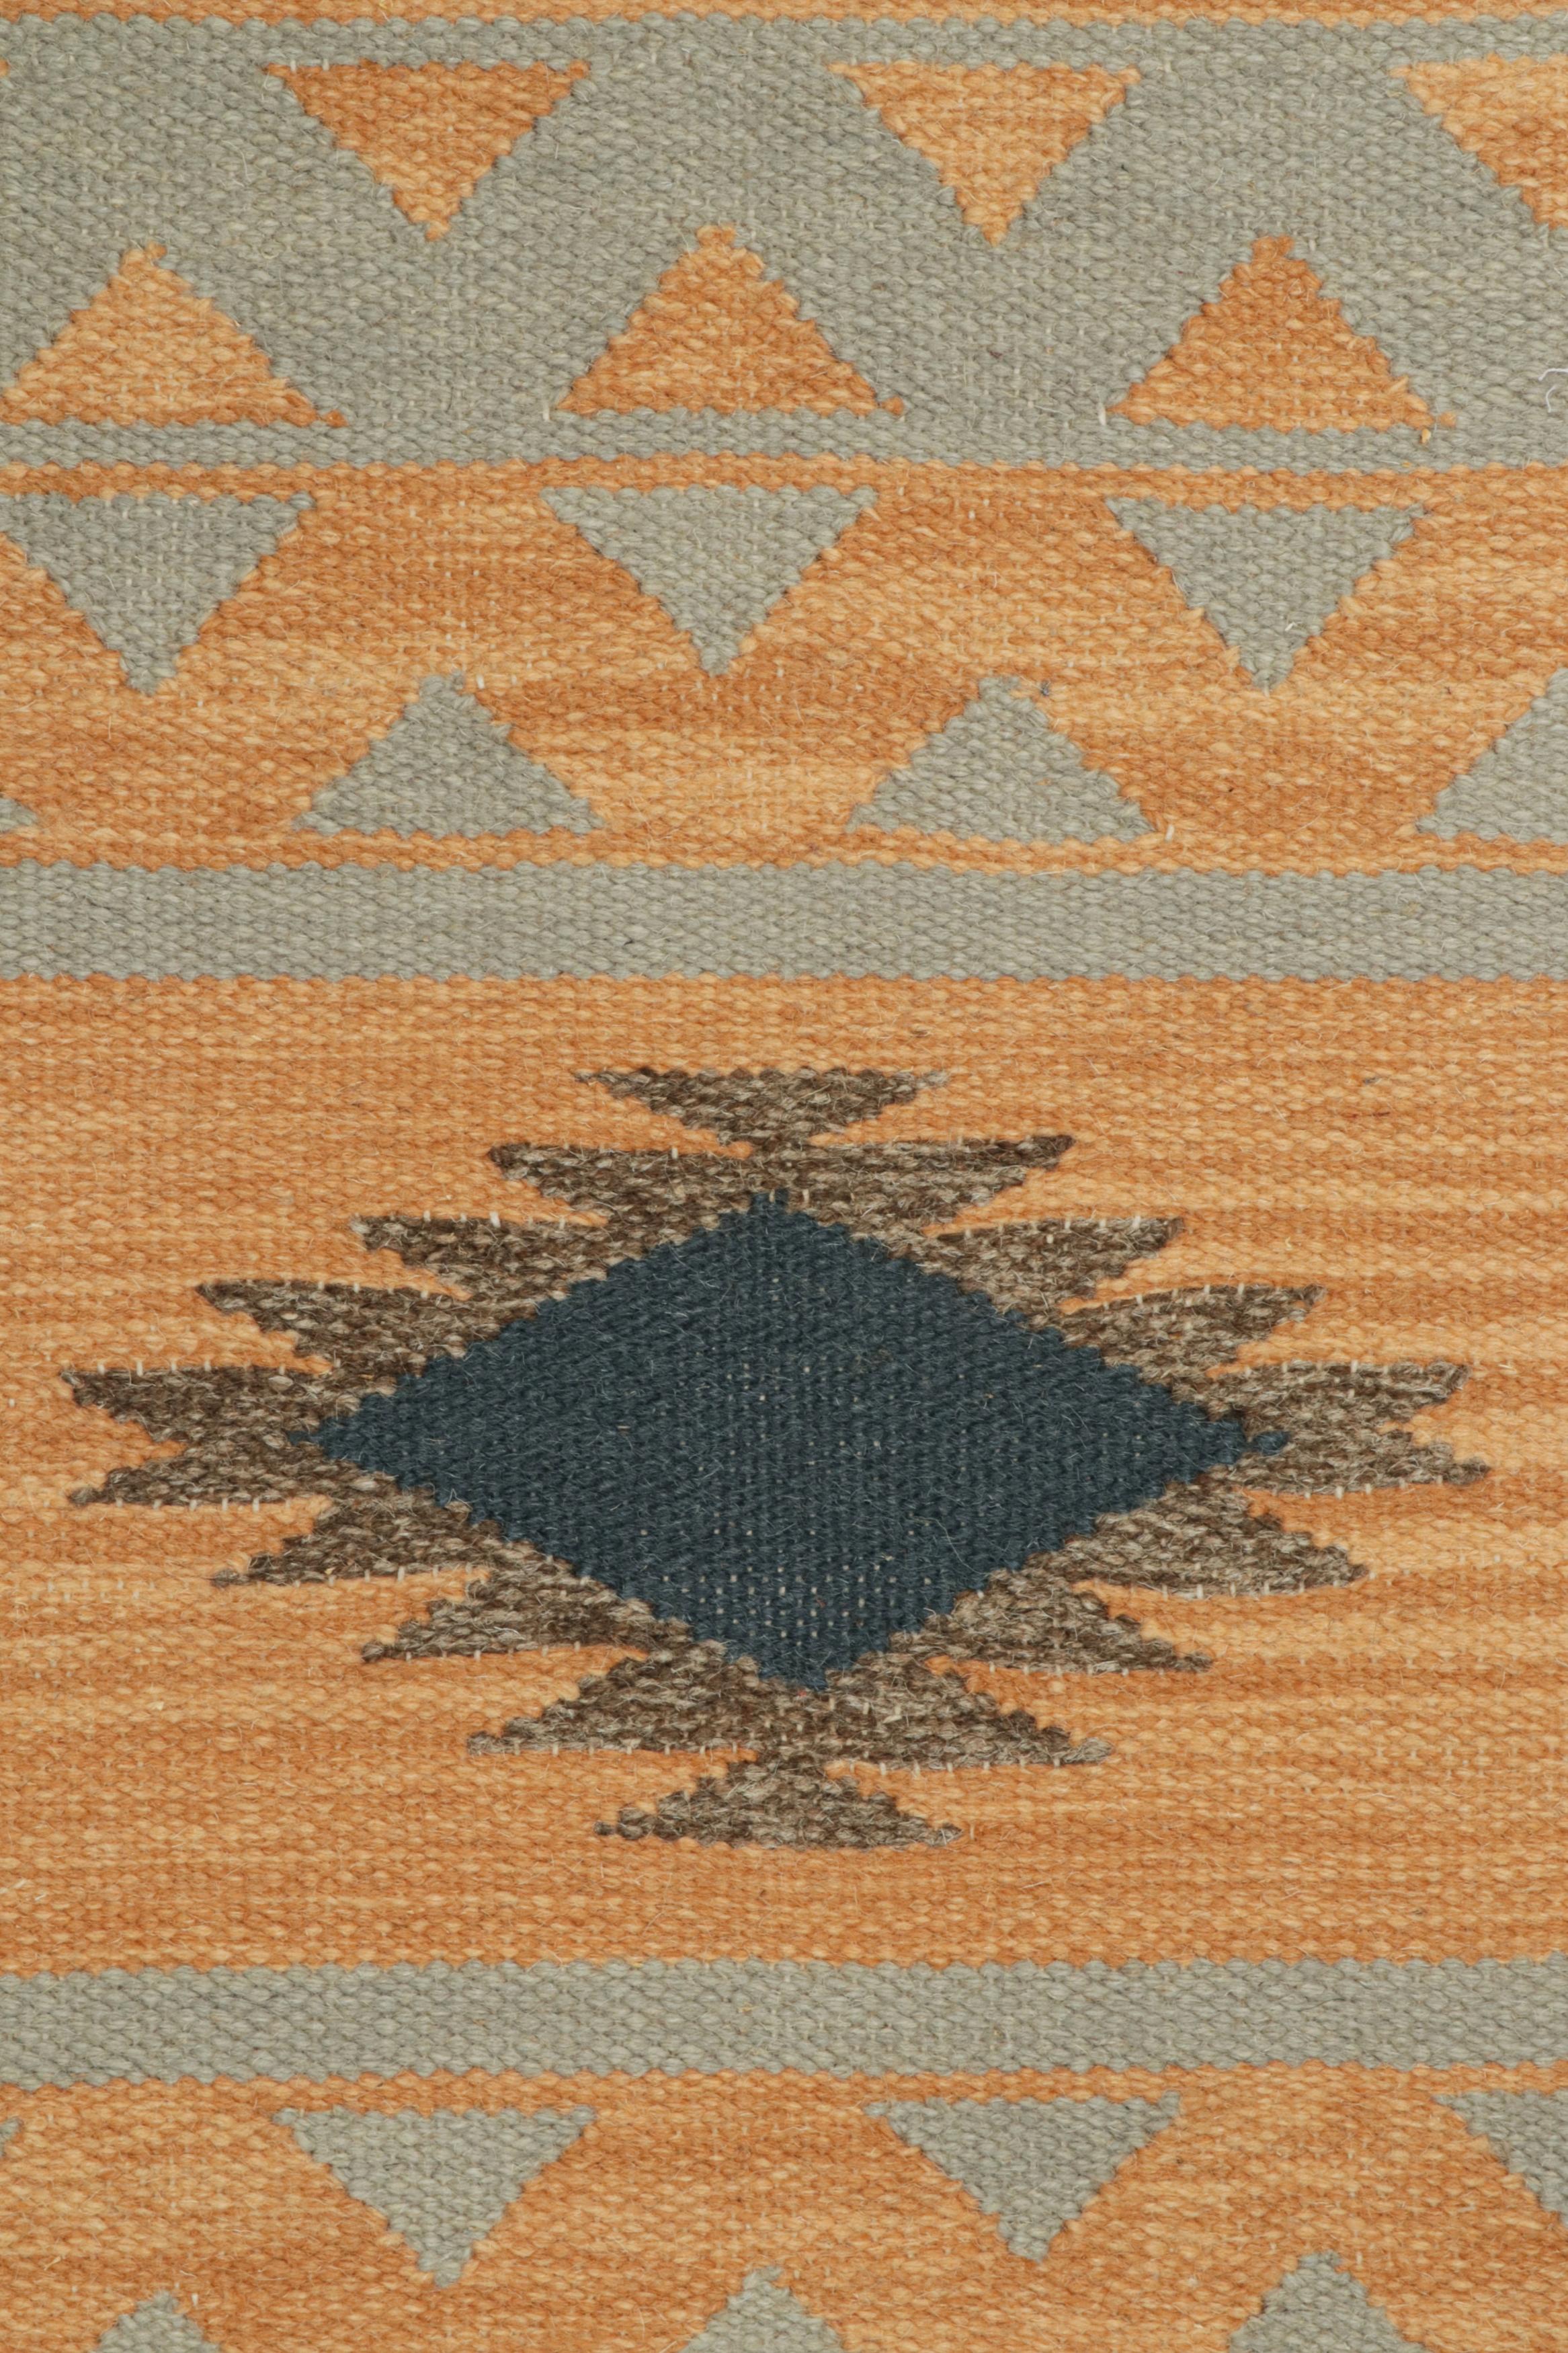 Rug & Kilim’s Tribal style Kilim in Gold with Grey & Black Patterns In New Condition For Sale In Long Island City, NY